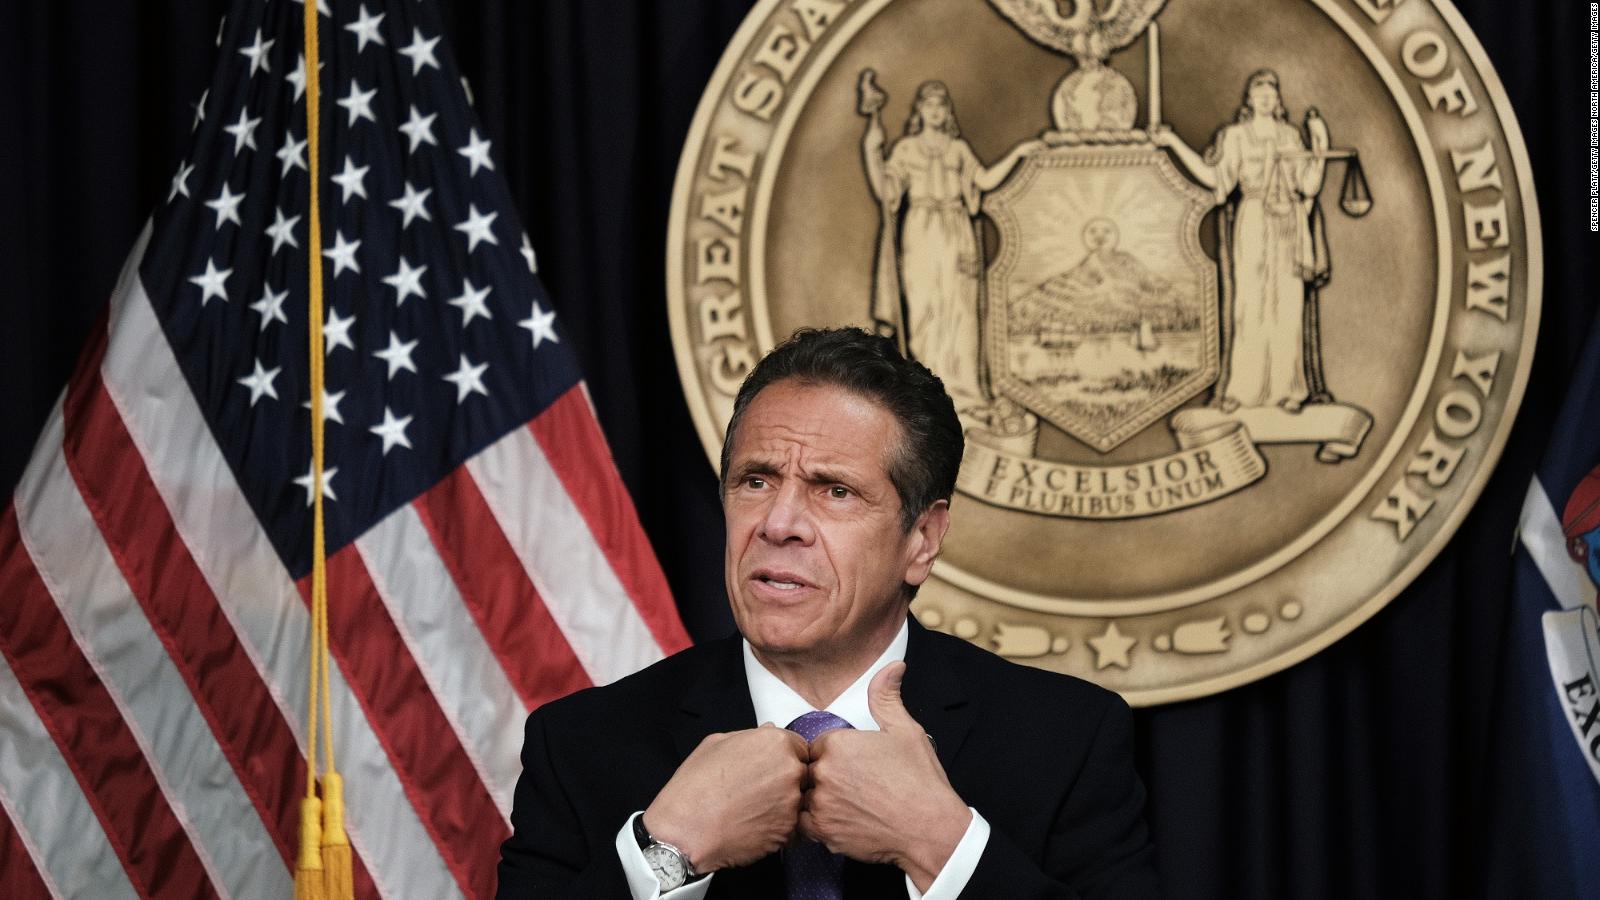 Andrew Cuomo Sexual Assault: Everything You Need to know